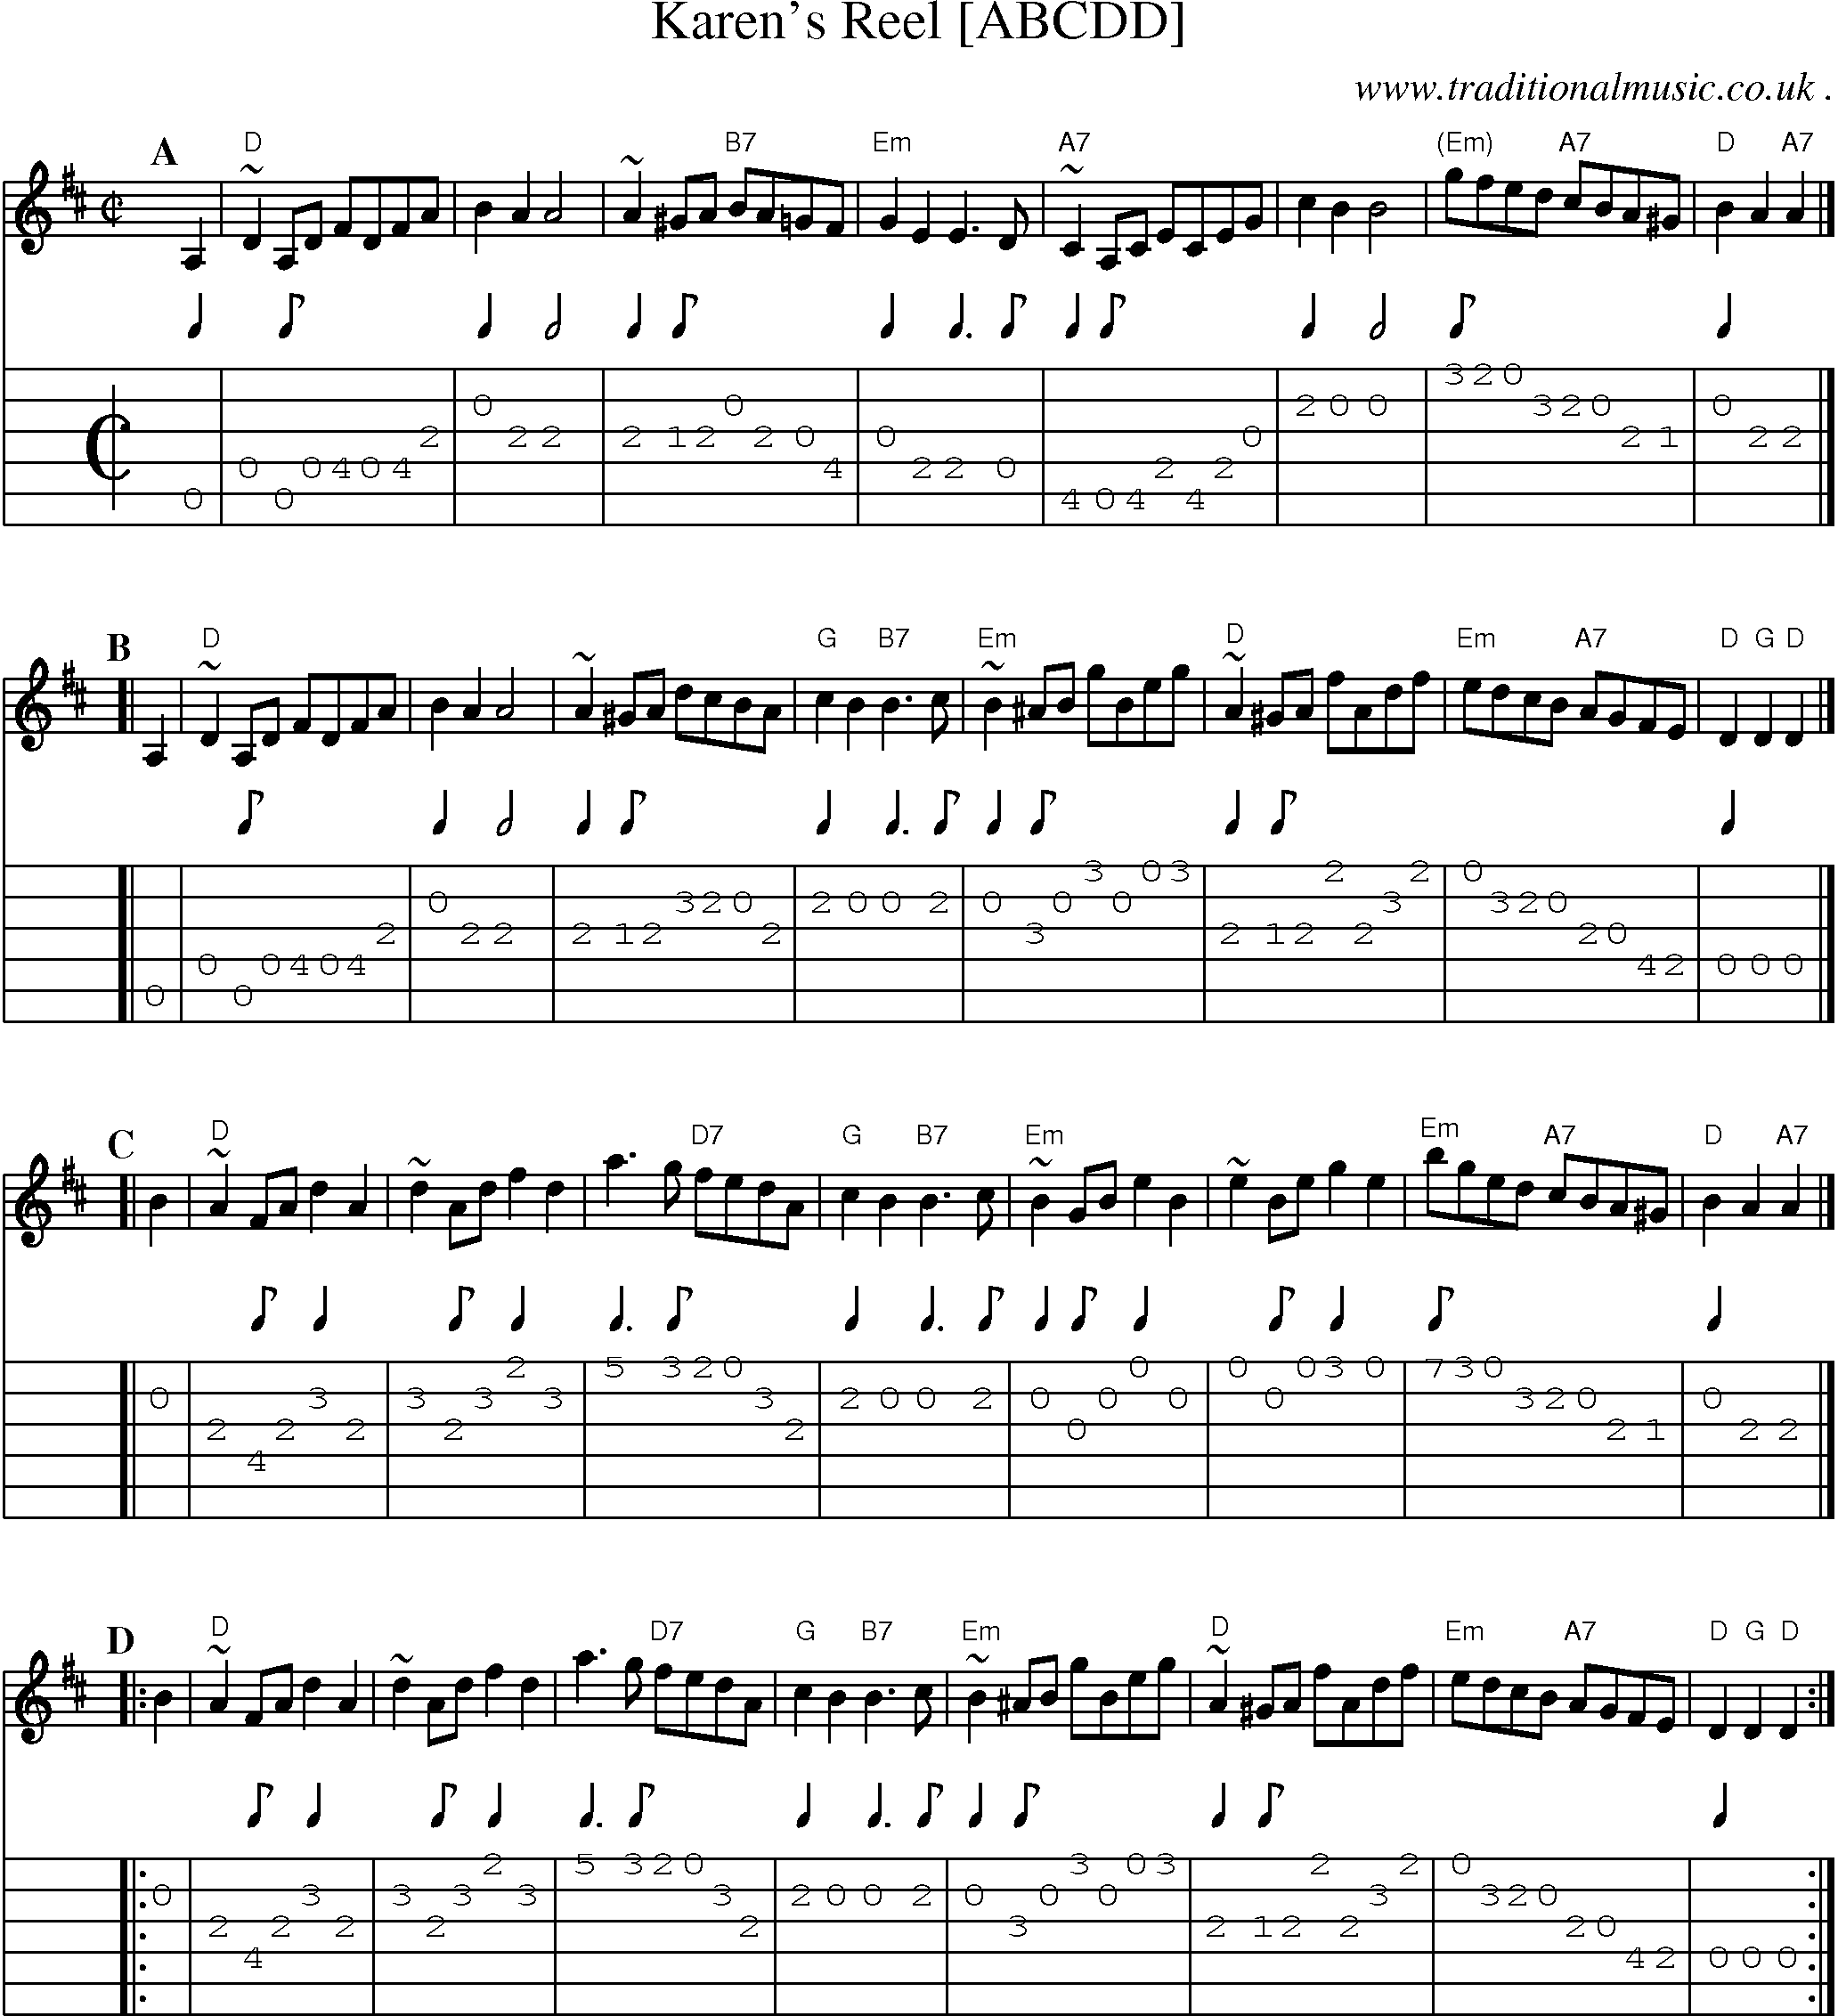 Sheet-music  score, Chords and Guitar Tabs for Karens Reel [abcdd]